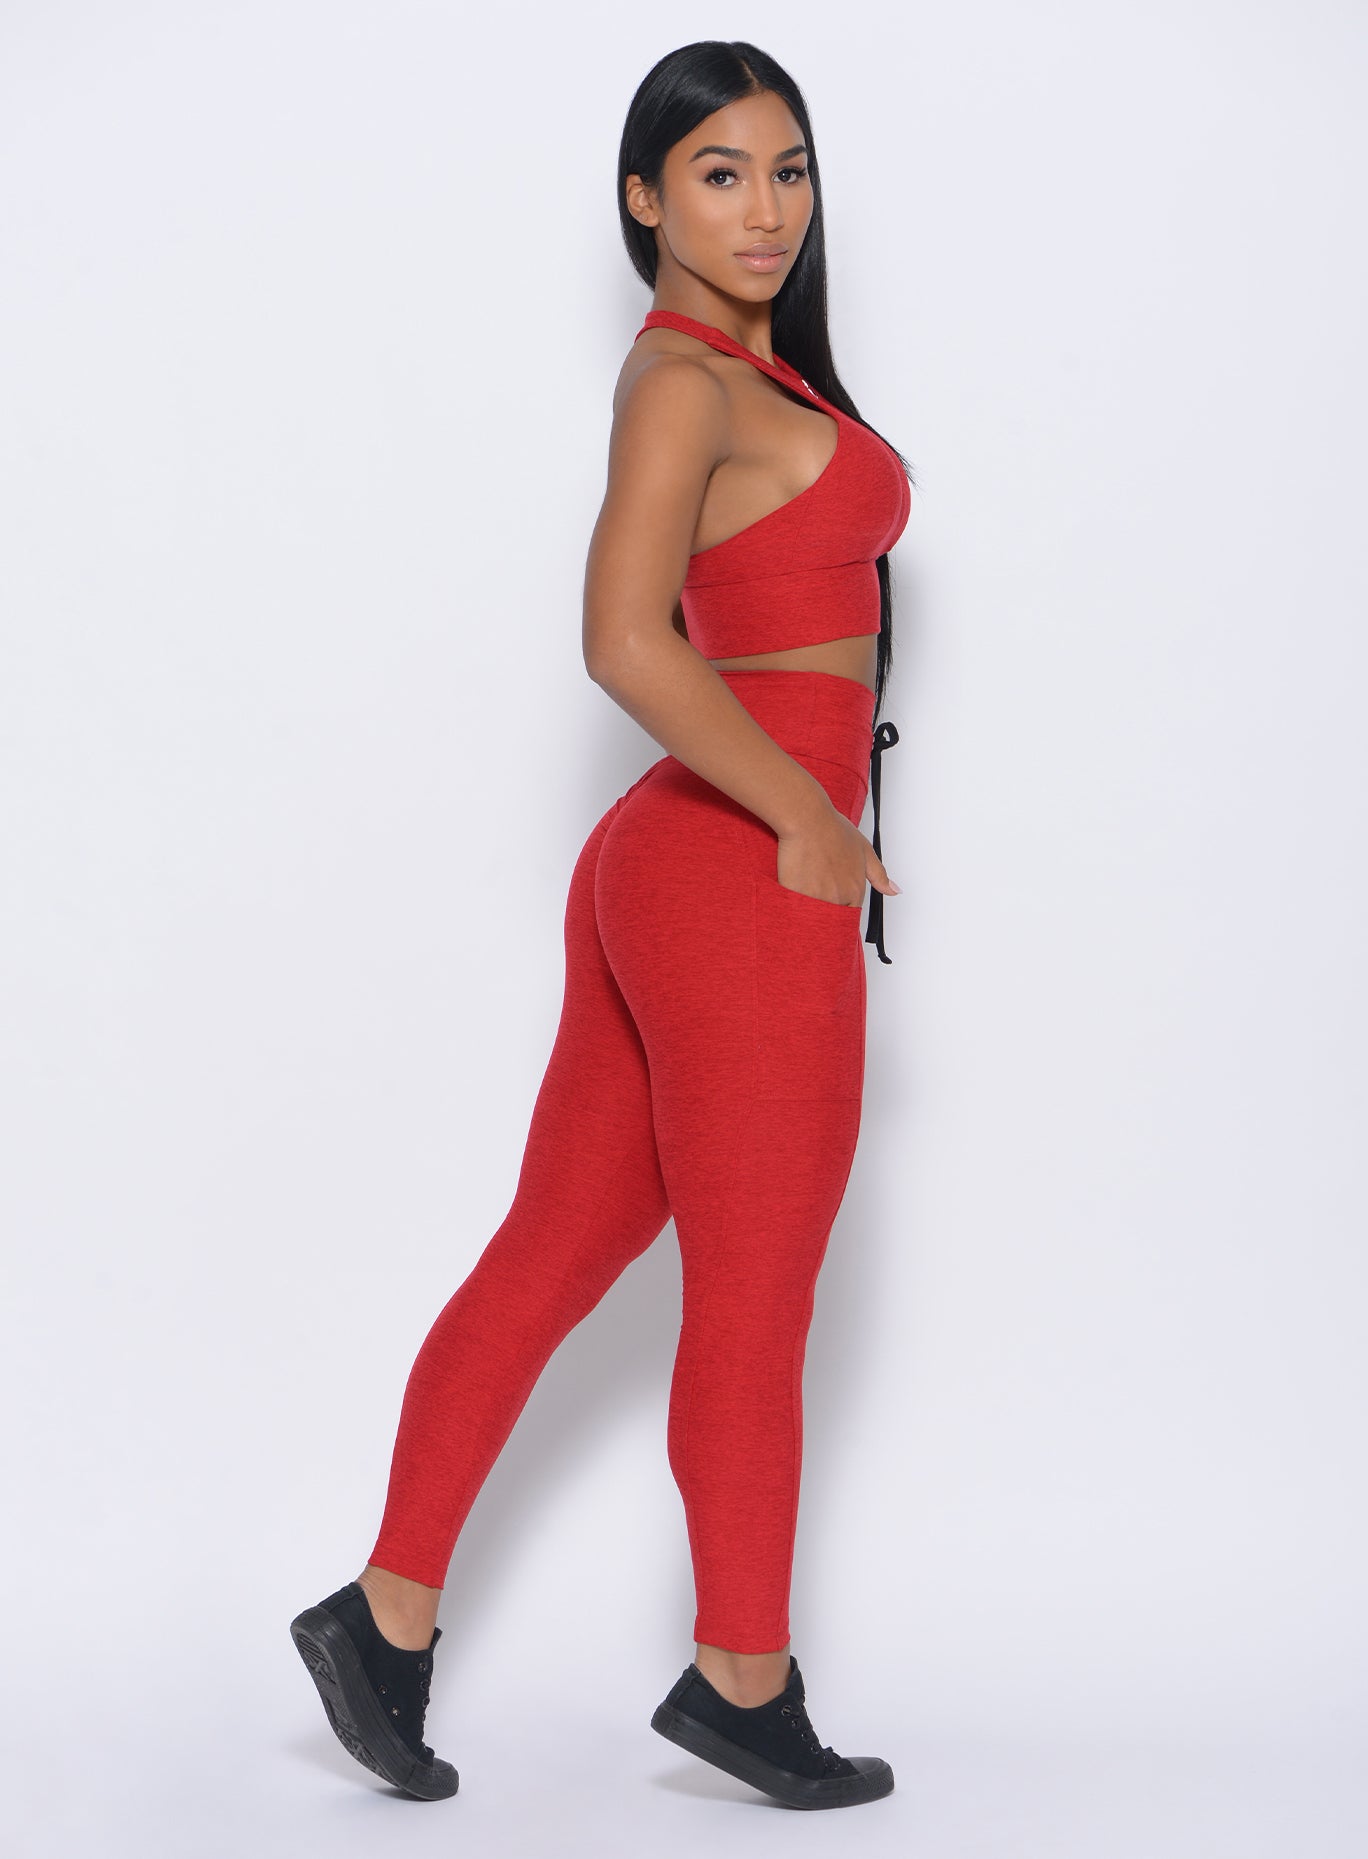 Right side view of the model wearing our thrive leggings in sunset red color and a matching bra